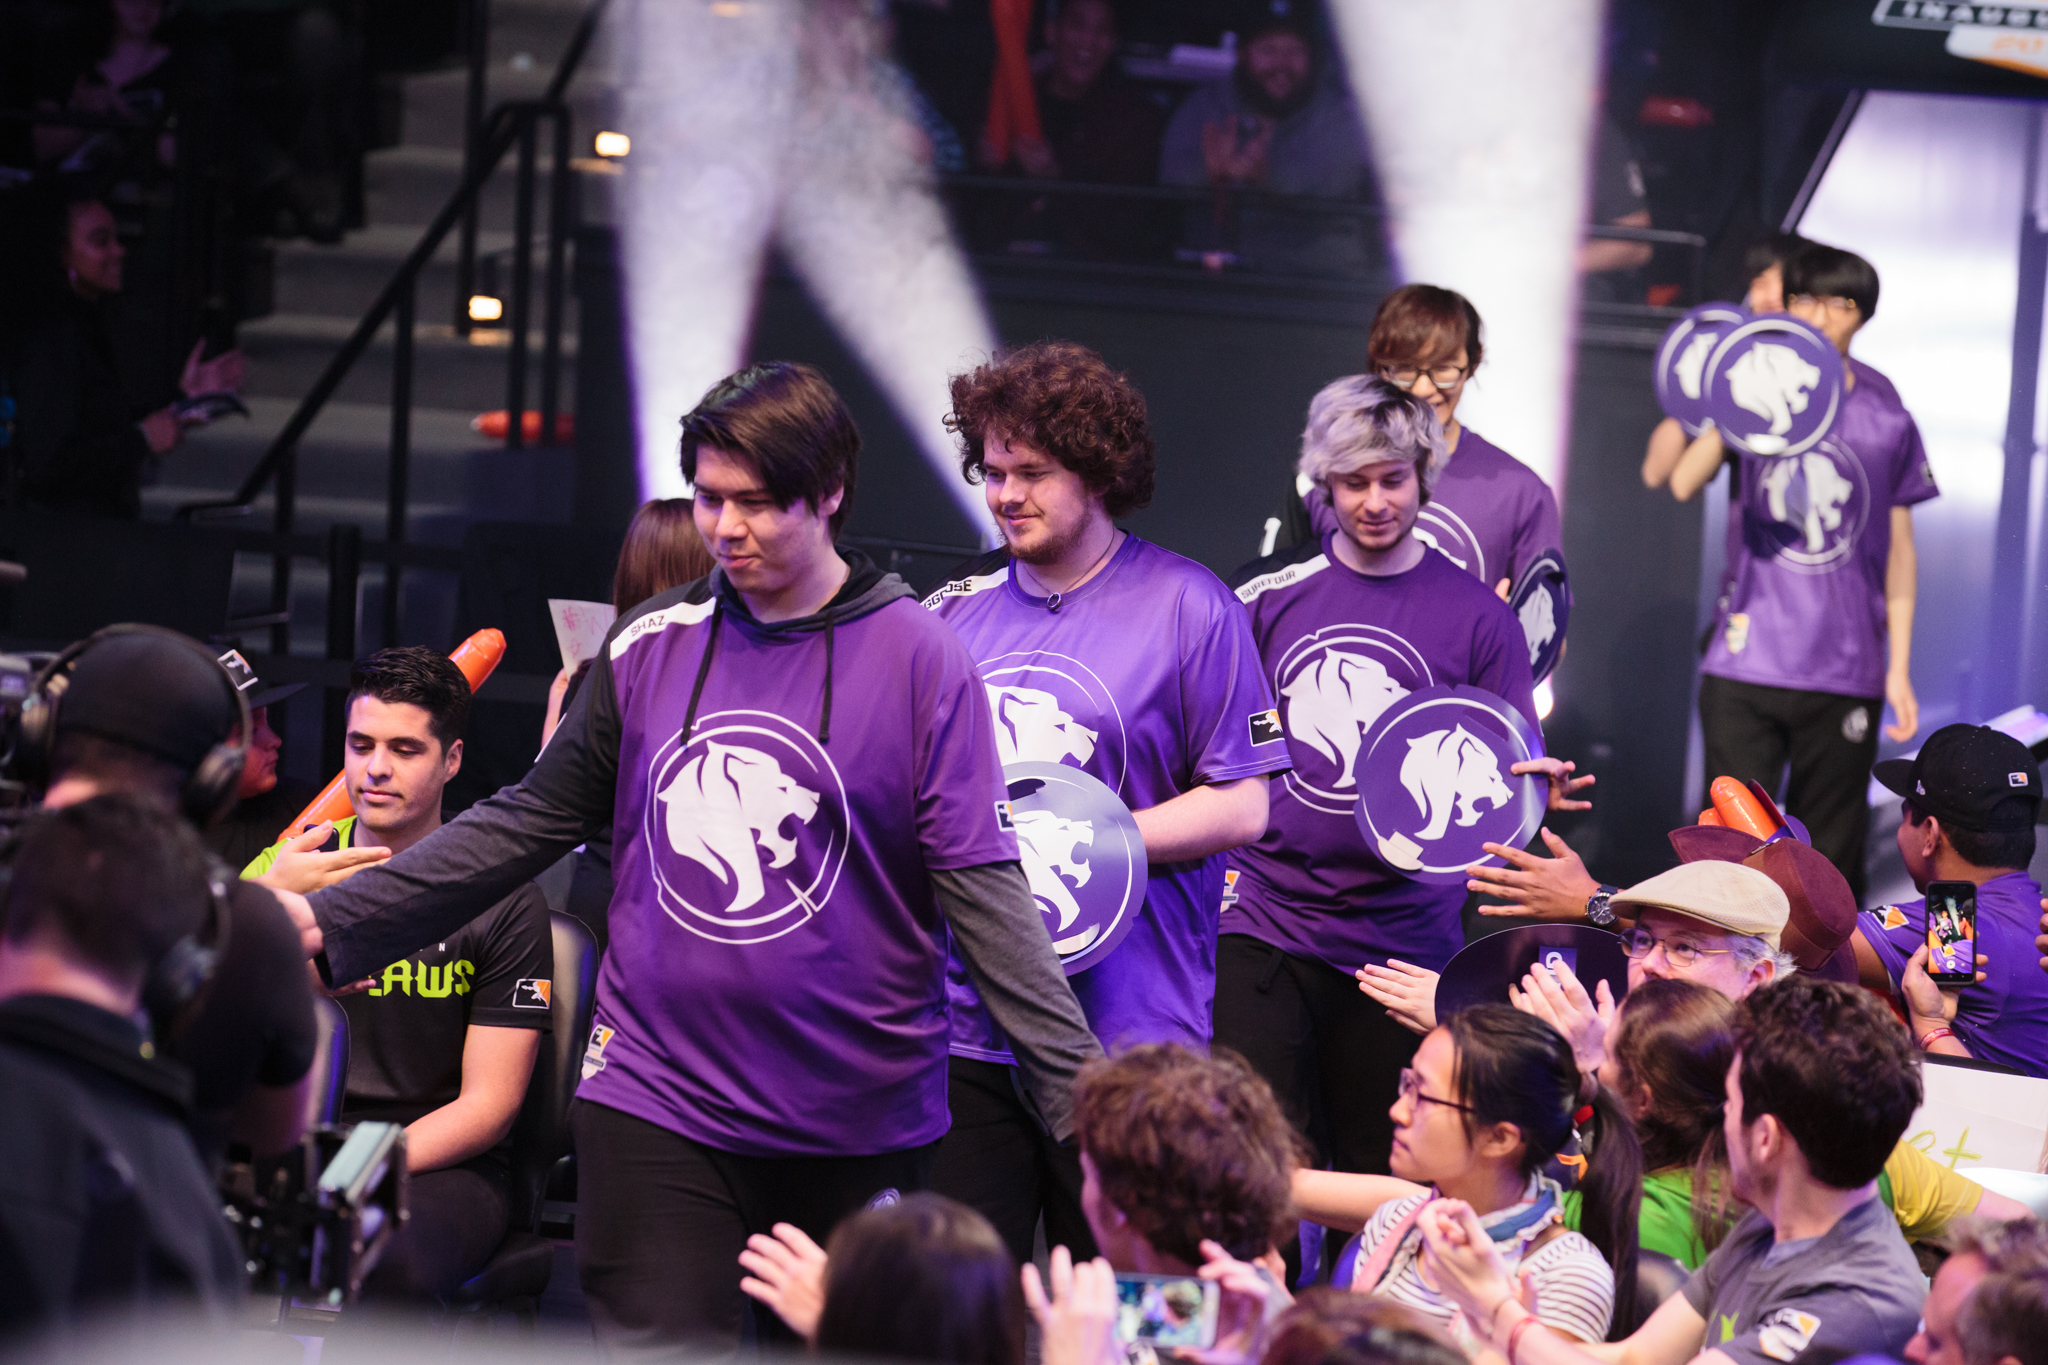 Kai joined the Los Angeles Gladiators